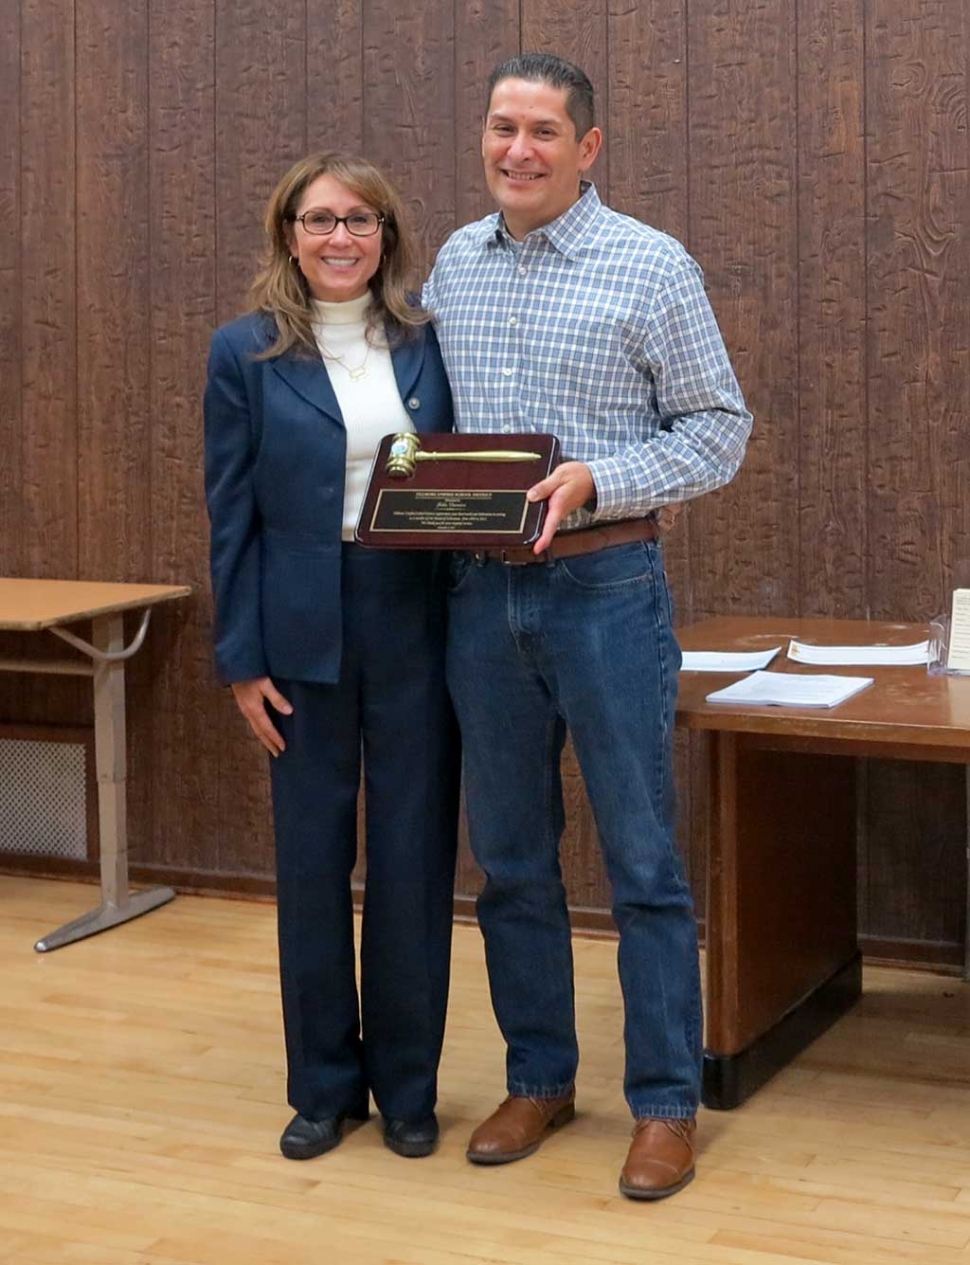 (l-r) Board President Virginia de la Piedra and John Garnica. The Fillmore Unified School District School Board presented John Garnica with a plaque in appreciation of his years of service on the Board. Garnica recently resigned when his wife Beverly was appointed as the Principal of Rio Vista Elementary School effective Monday, October 19, 2015. 